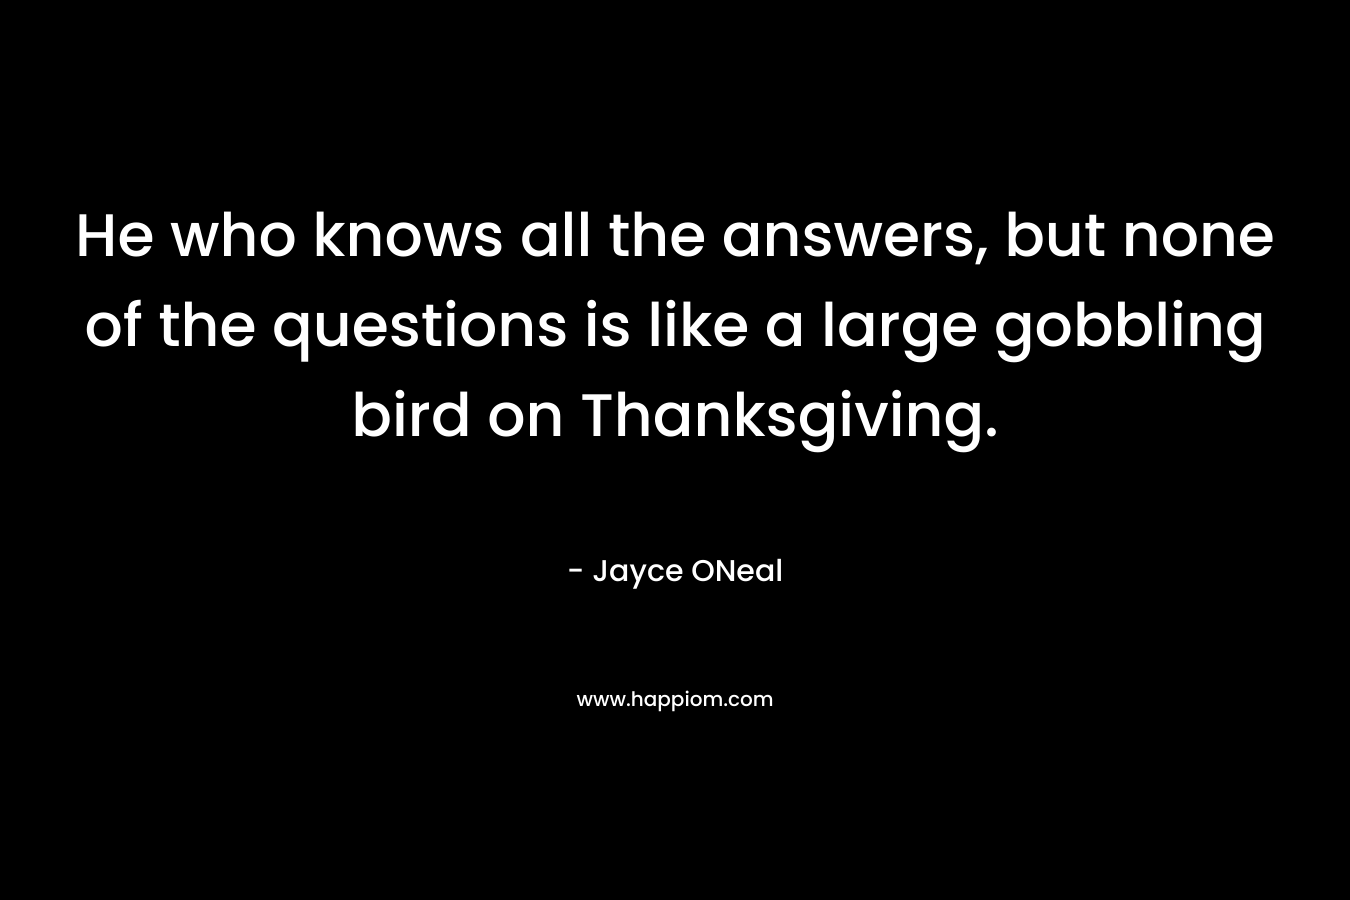 He who knows all the answers, but none of the questions is like a large gobbling bird on Thanksgiving. – Jayce ONeal